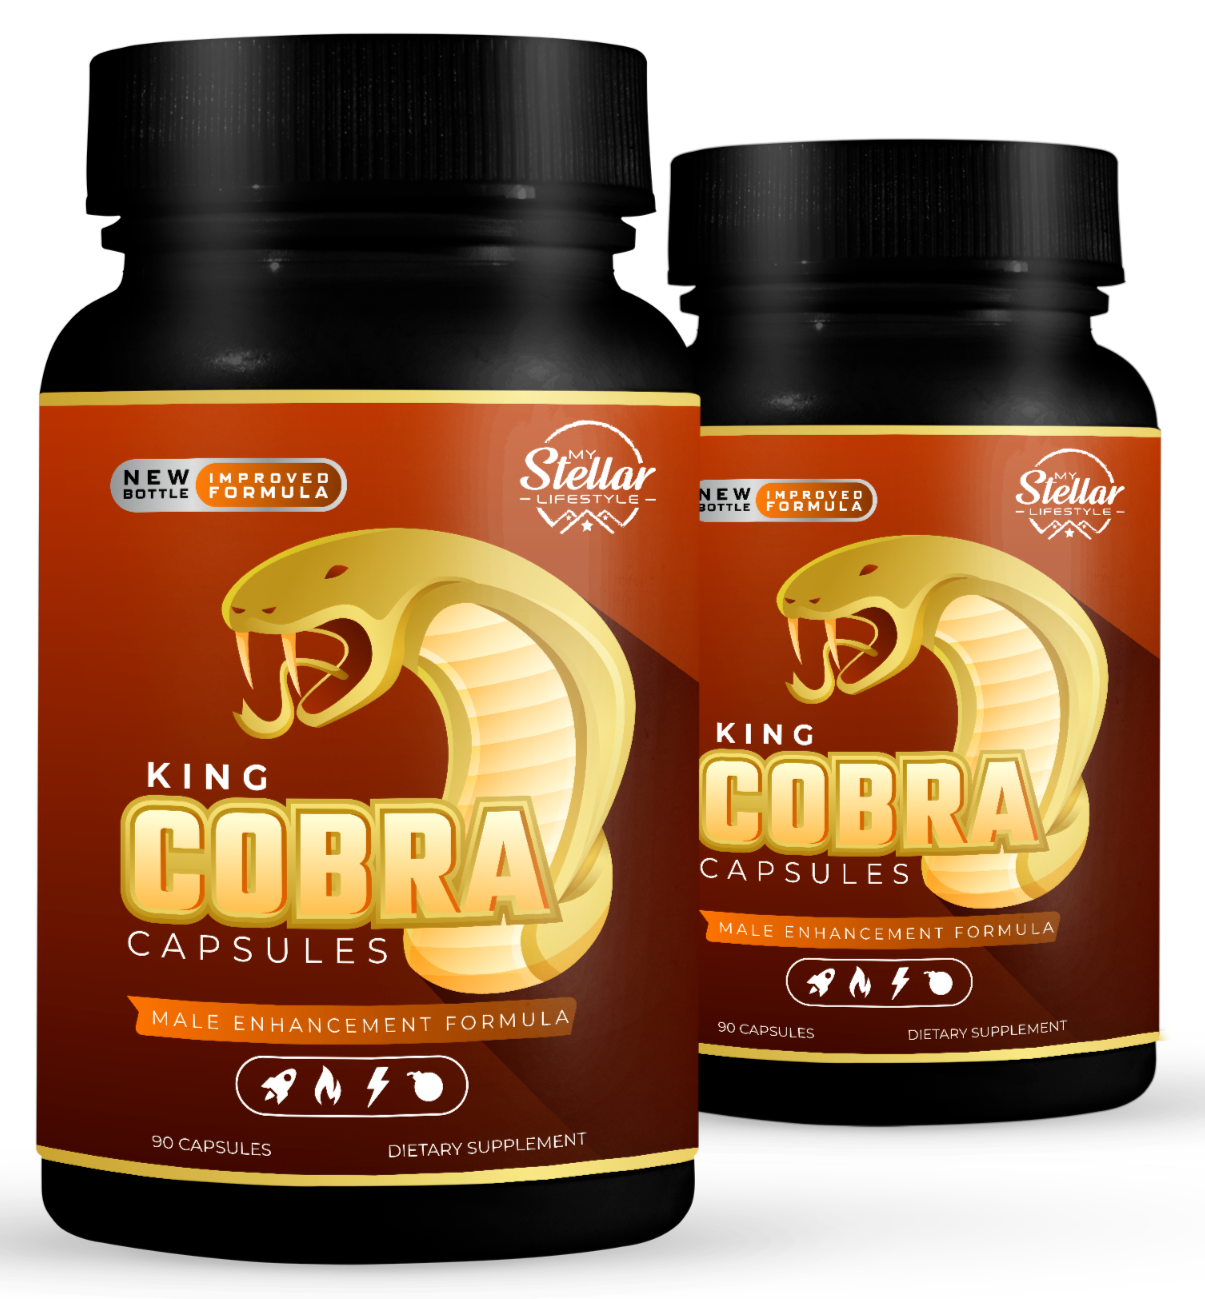 Primary image for 2 Pack King Cobra Capsules for Men-New Improved Forumla-90 Capsules x2